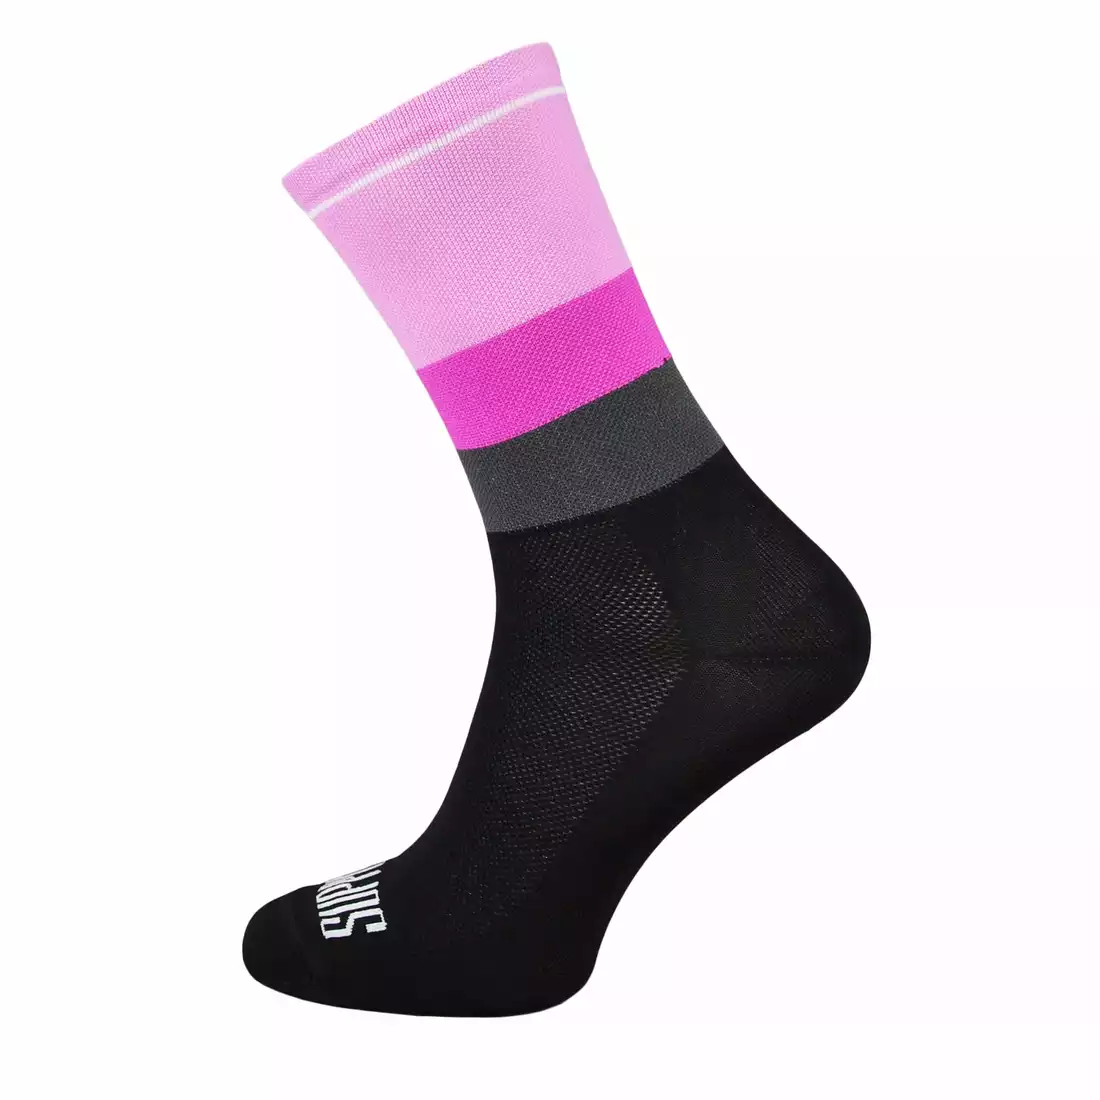 SUPPORTSPORT cycling socks TONE'S PINK 